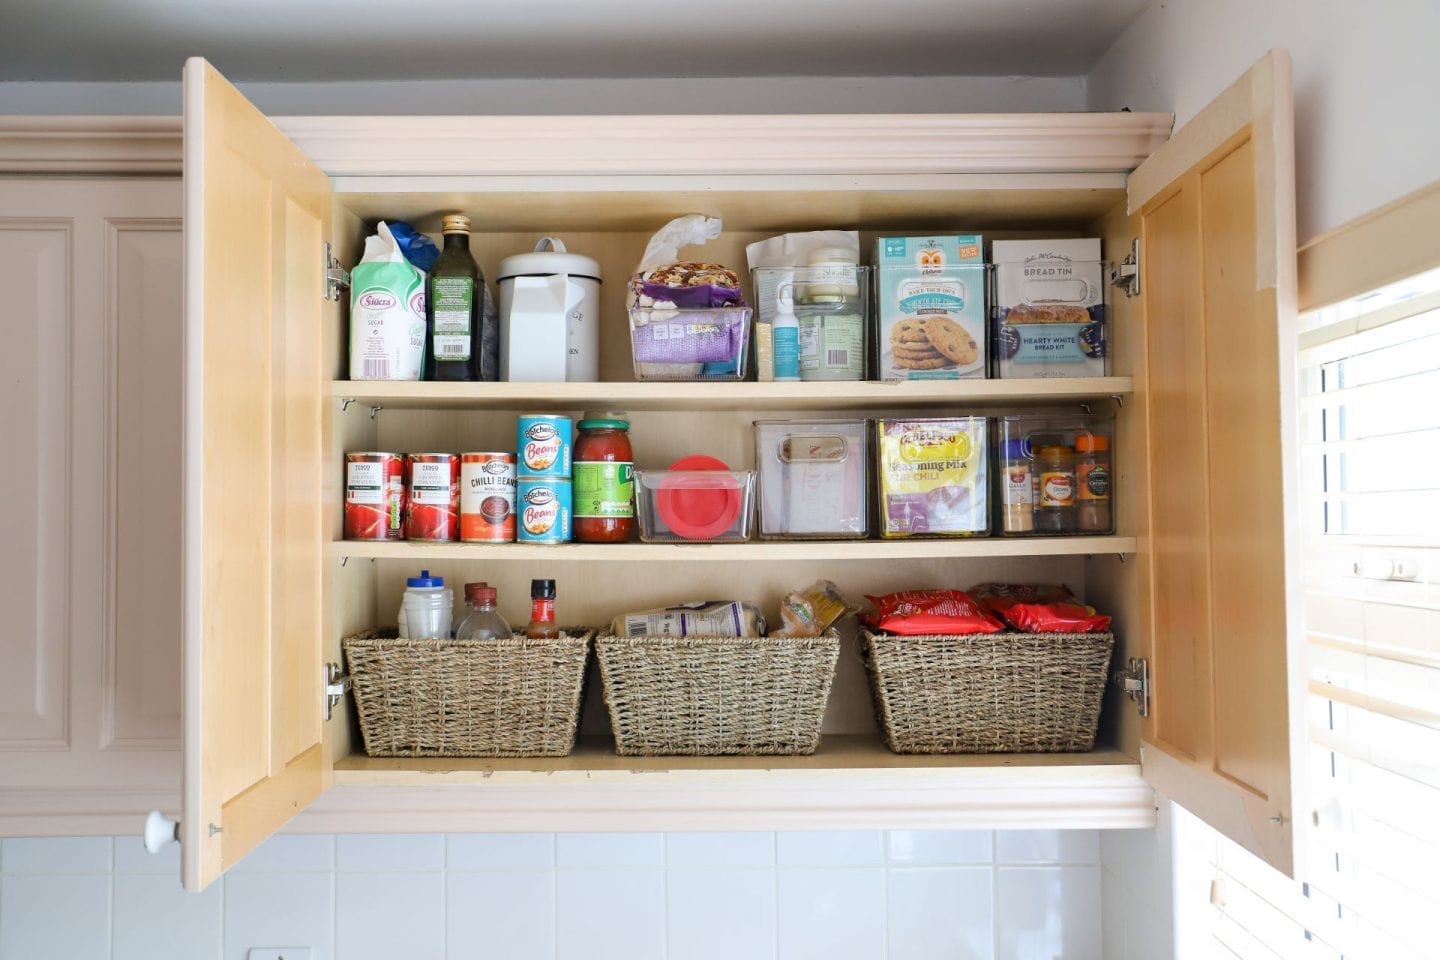 how to organize your kitchen cabinets